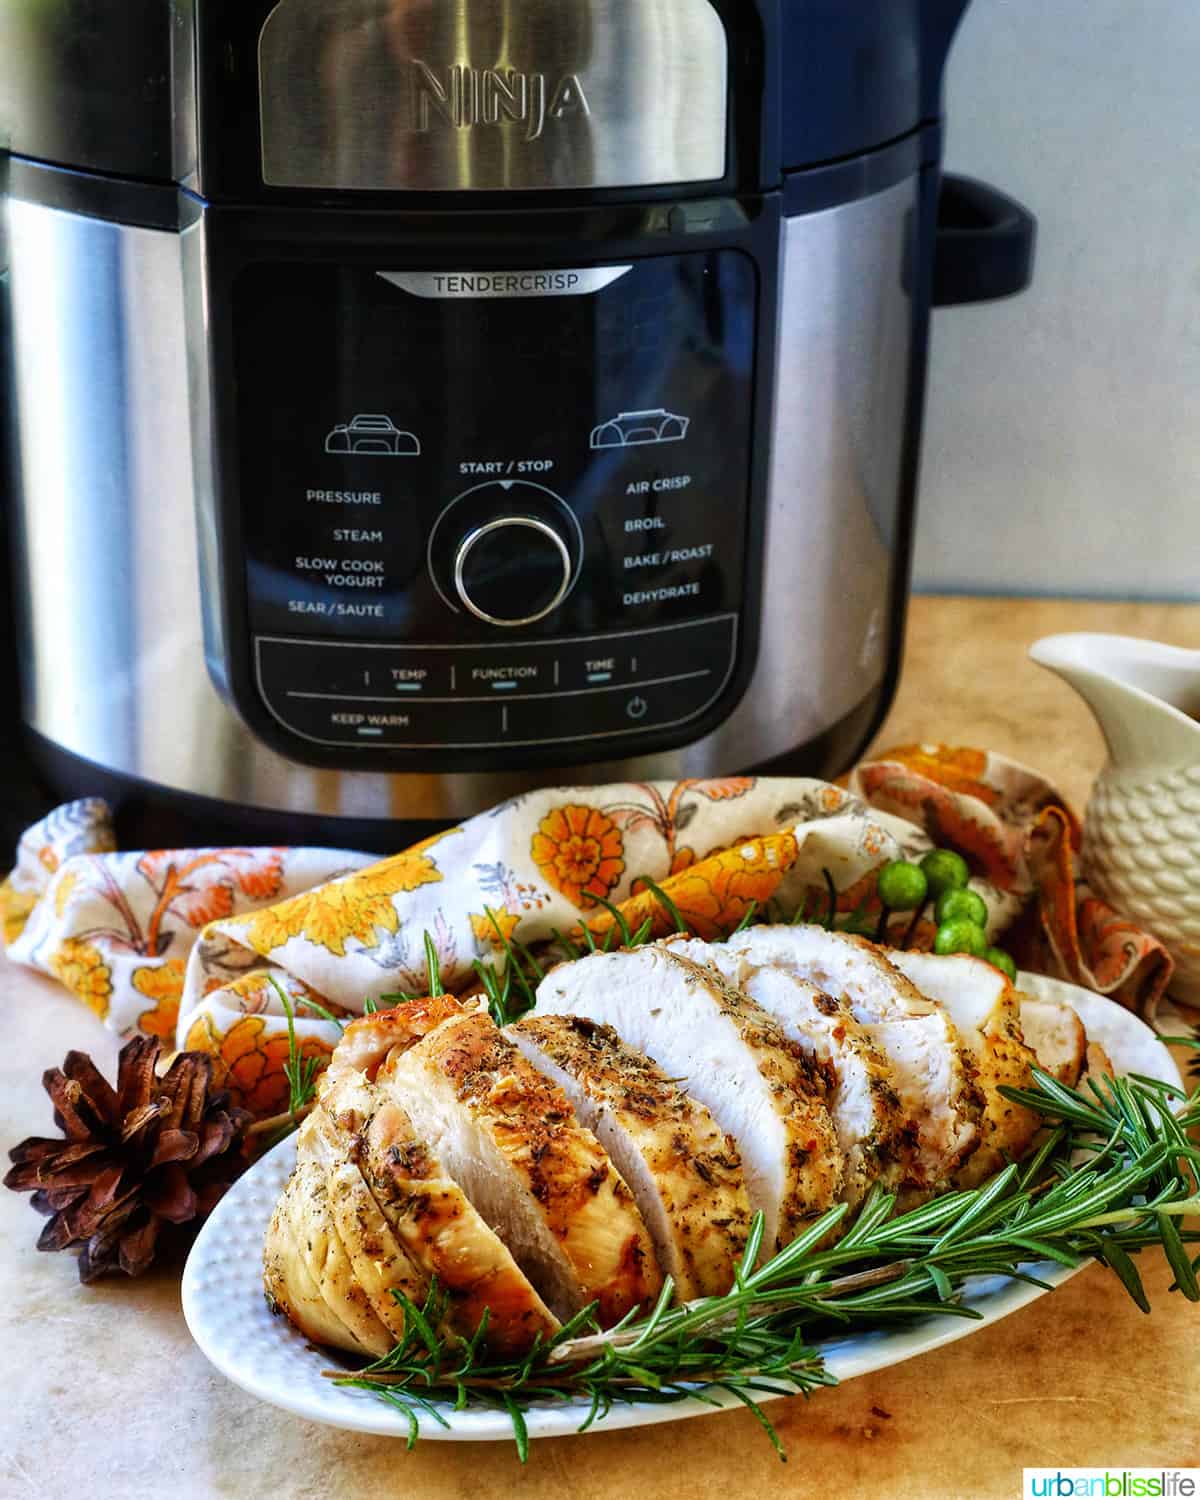 sliced air fryer turkey breast with herbs in front of an air fryer.